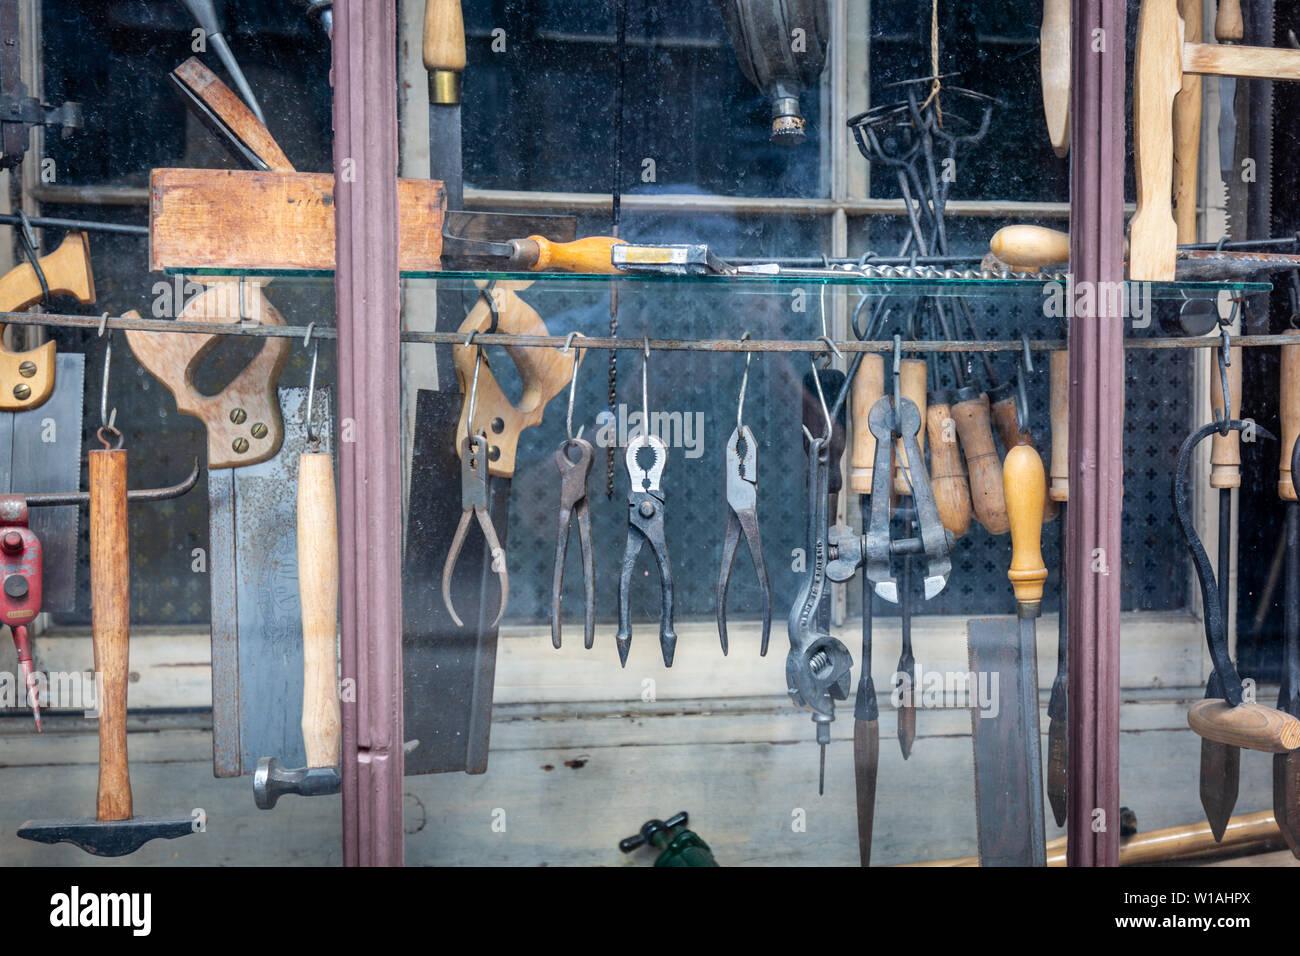 Traditional hardware shop window showing small tools for sale on display Stock Photo